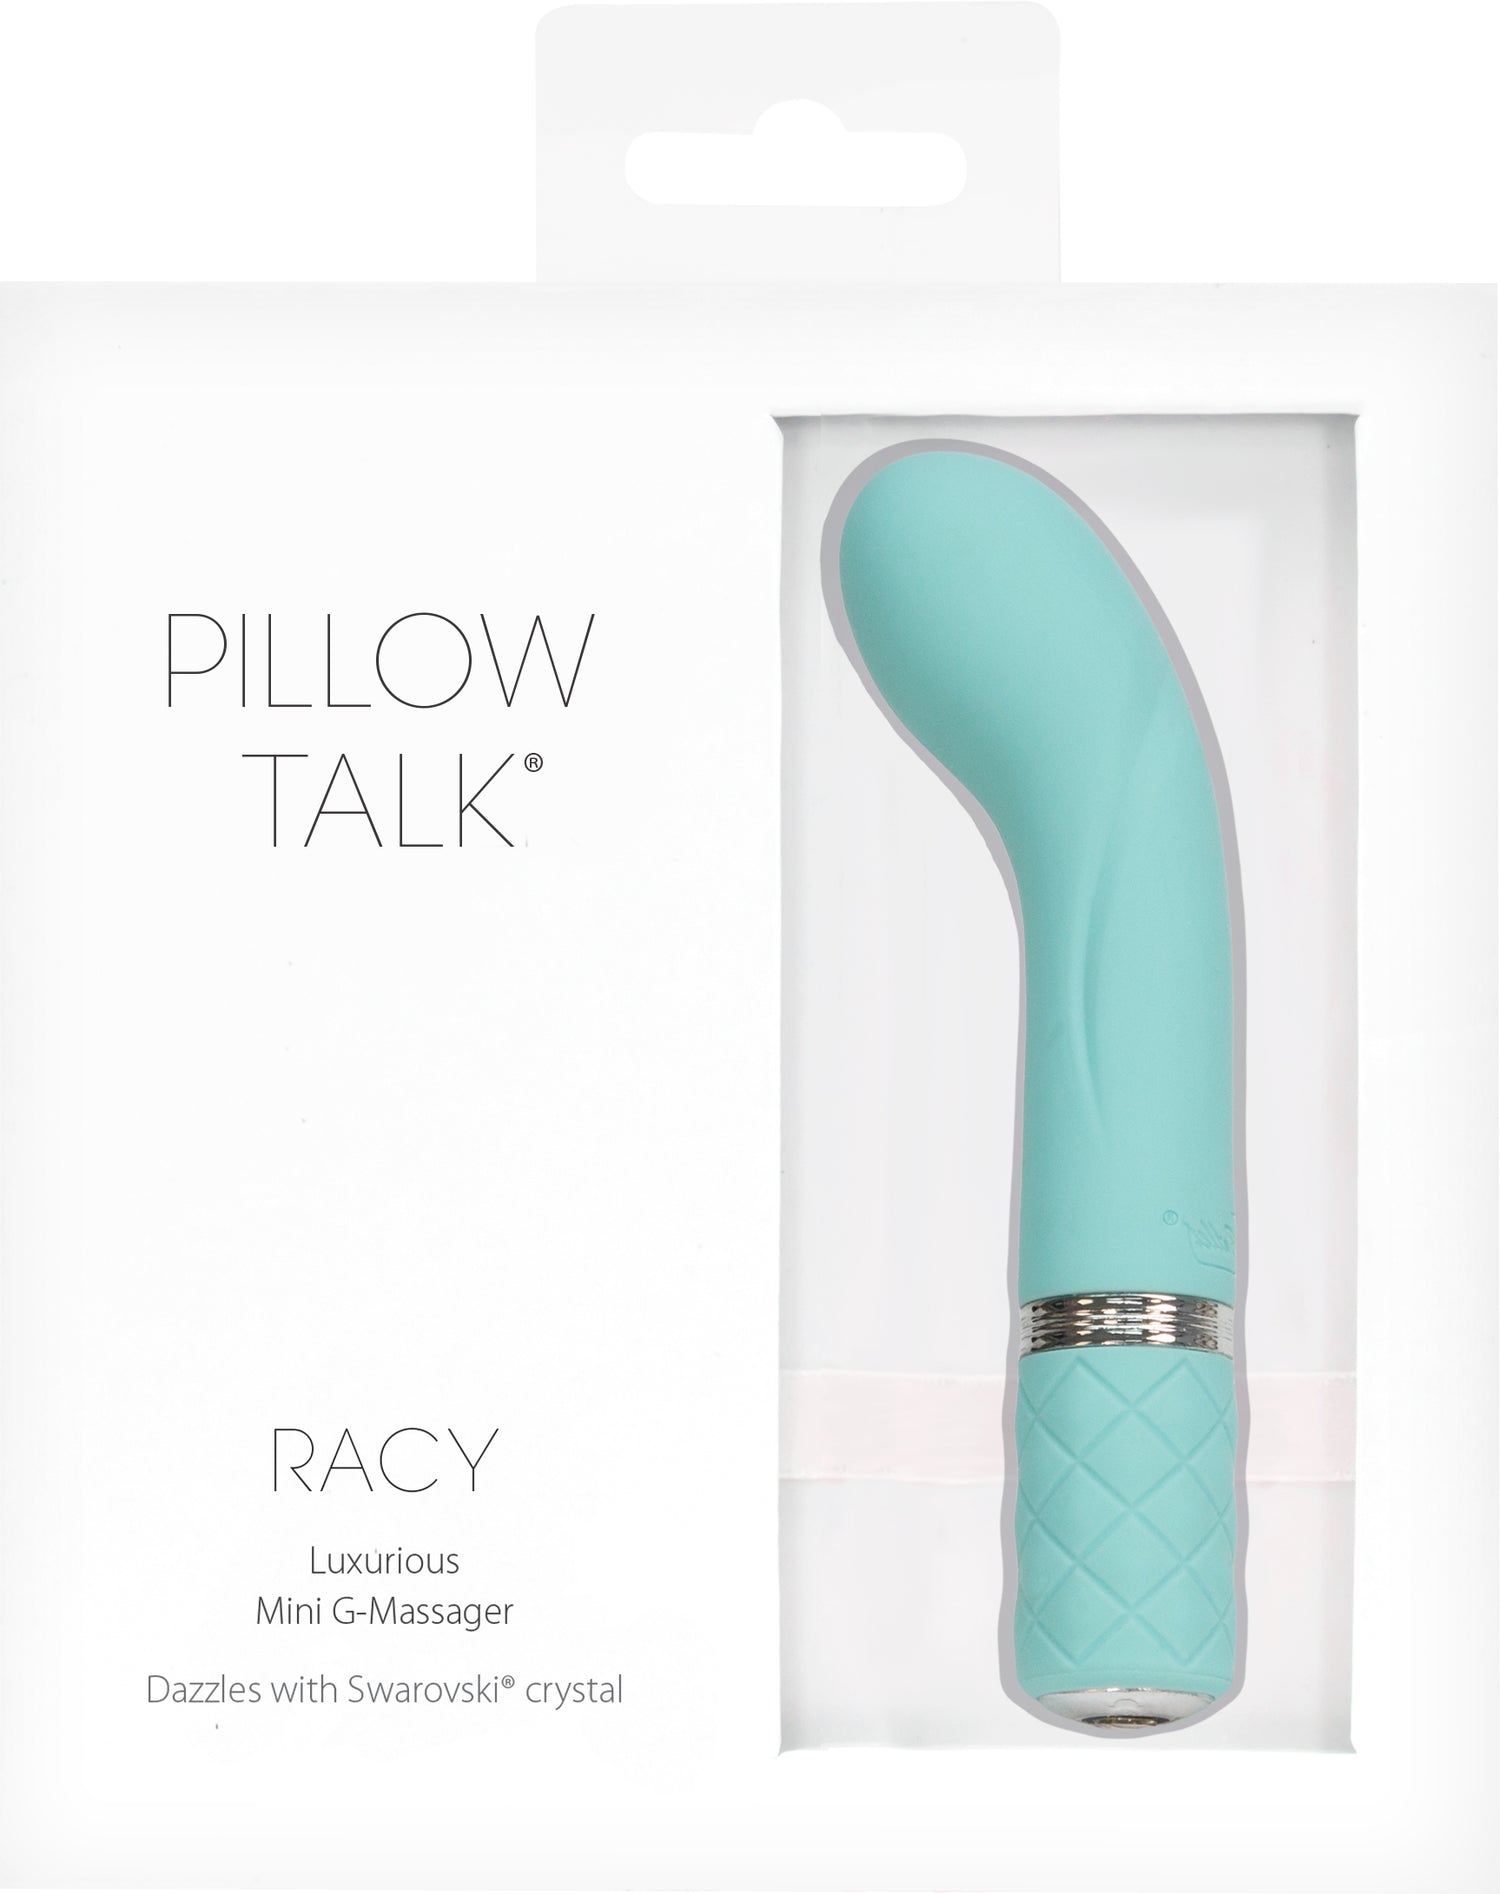 Pillow Talk Racy With Swarovski Crystal Teal - Just for you desires